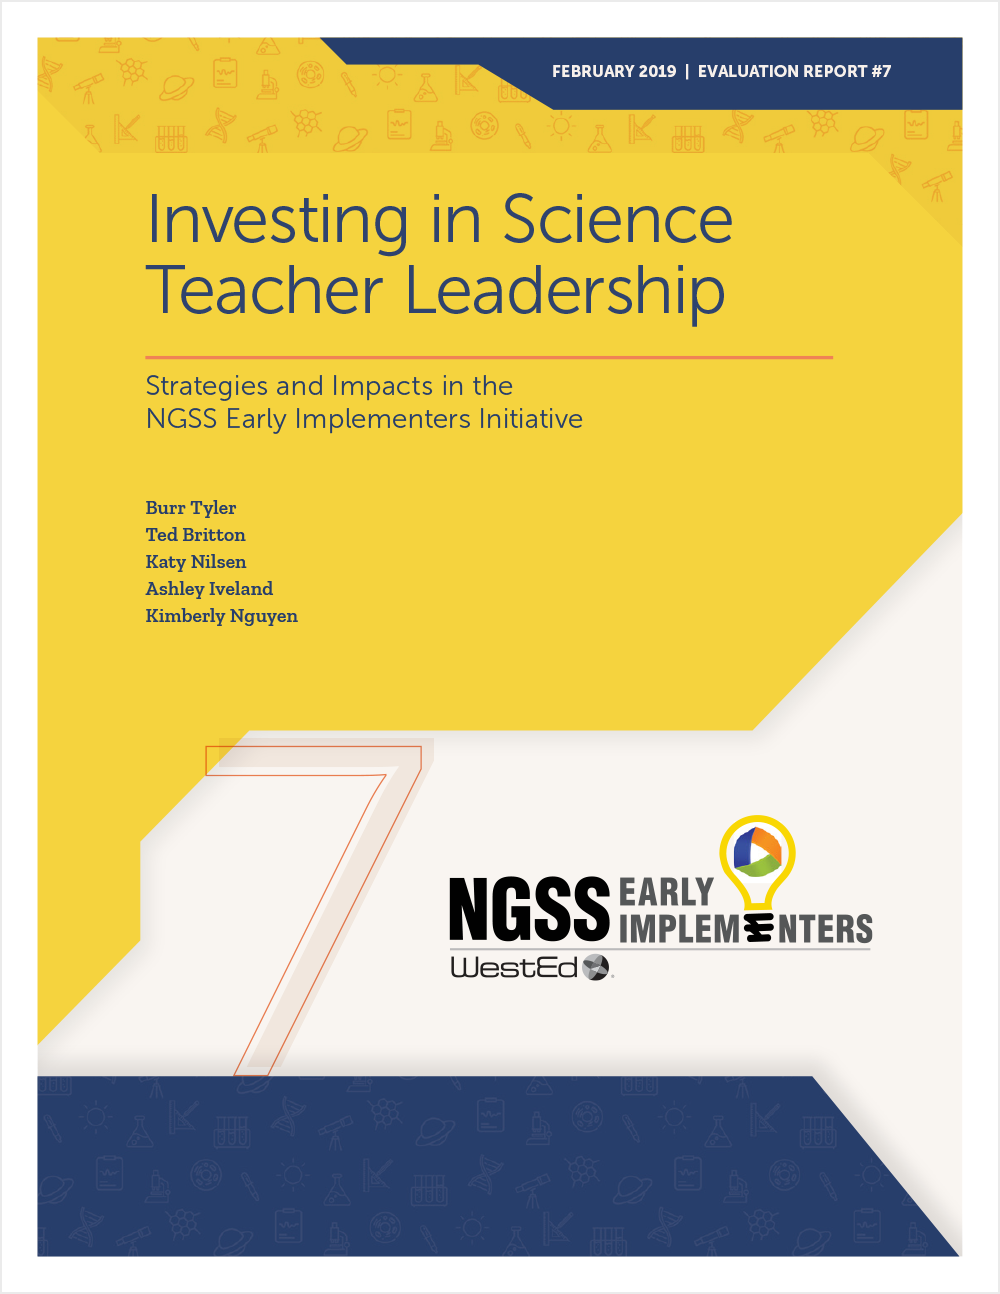 Investing in Science Teacher Leadership: Strategies and Impacts in the NGSS Early Implementers Initiative